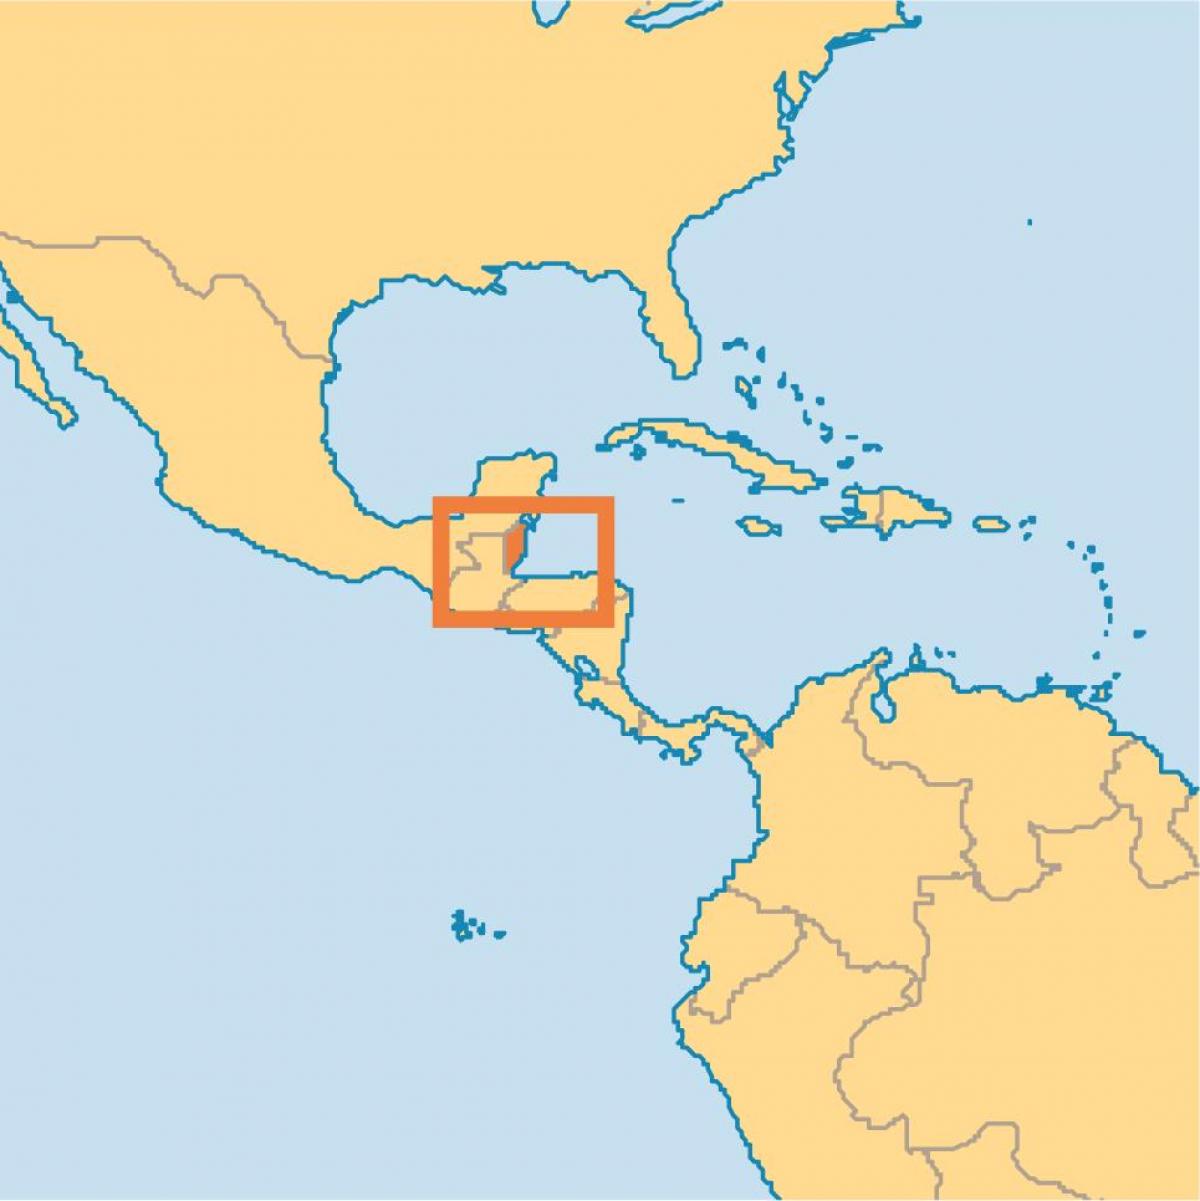 Belize location on world map